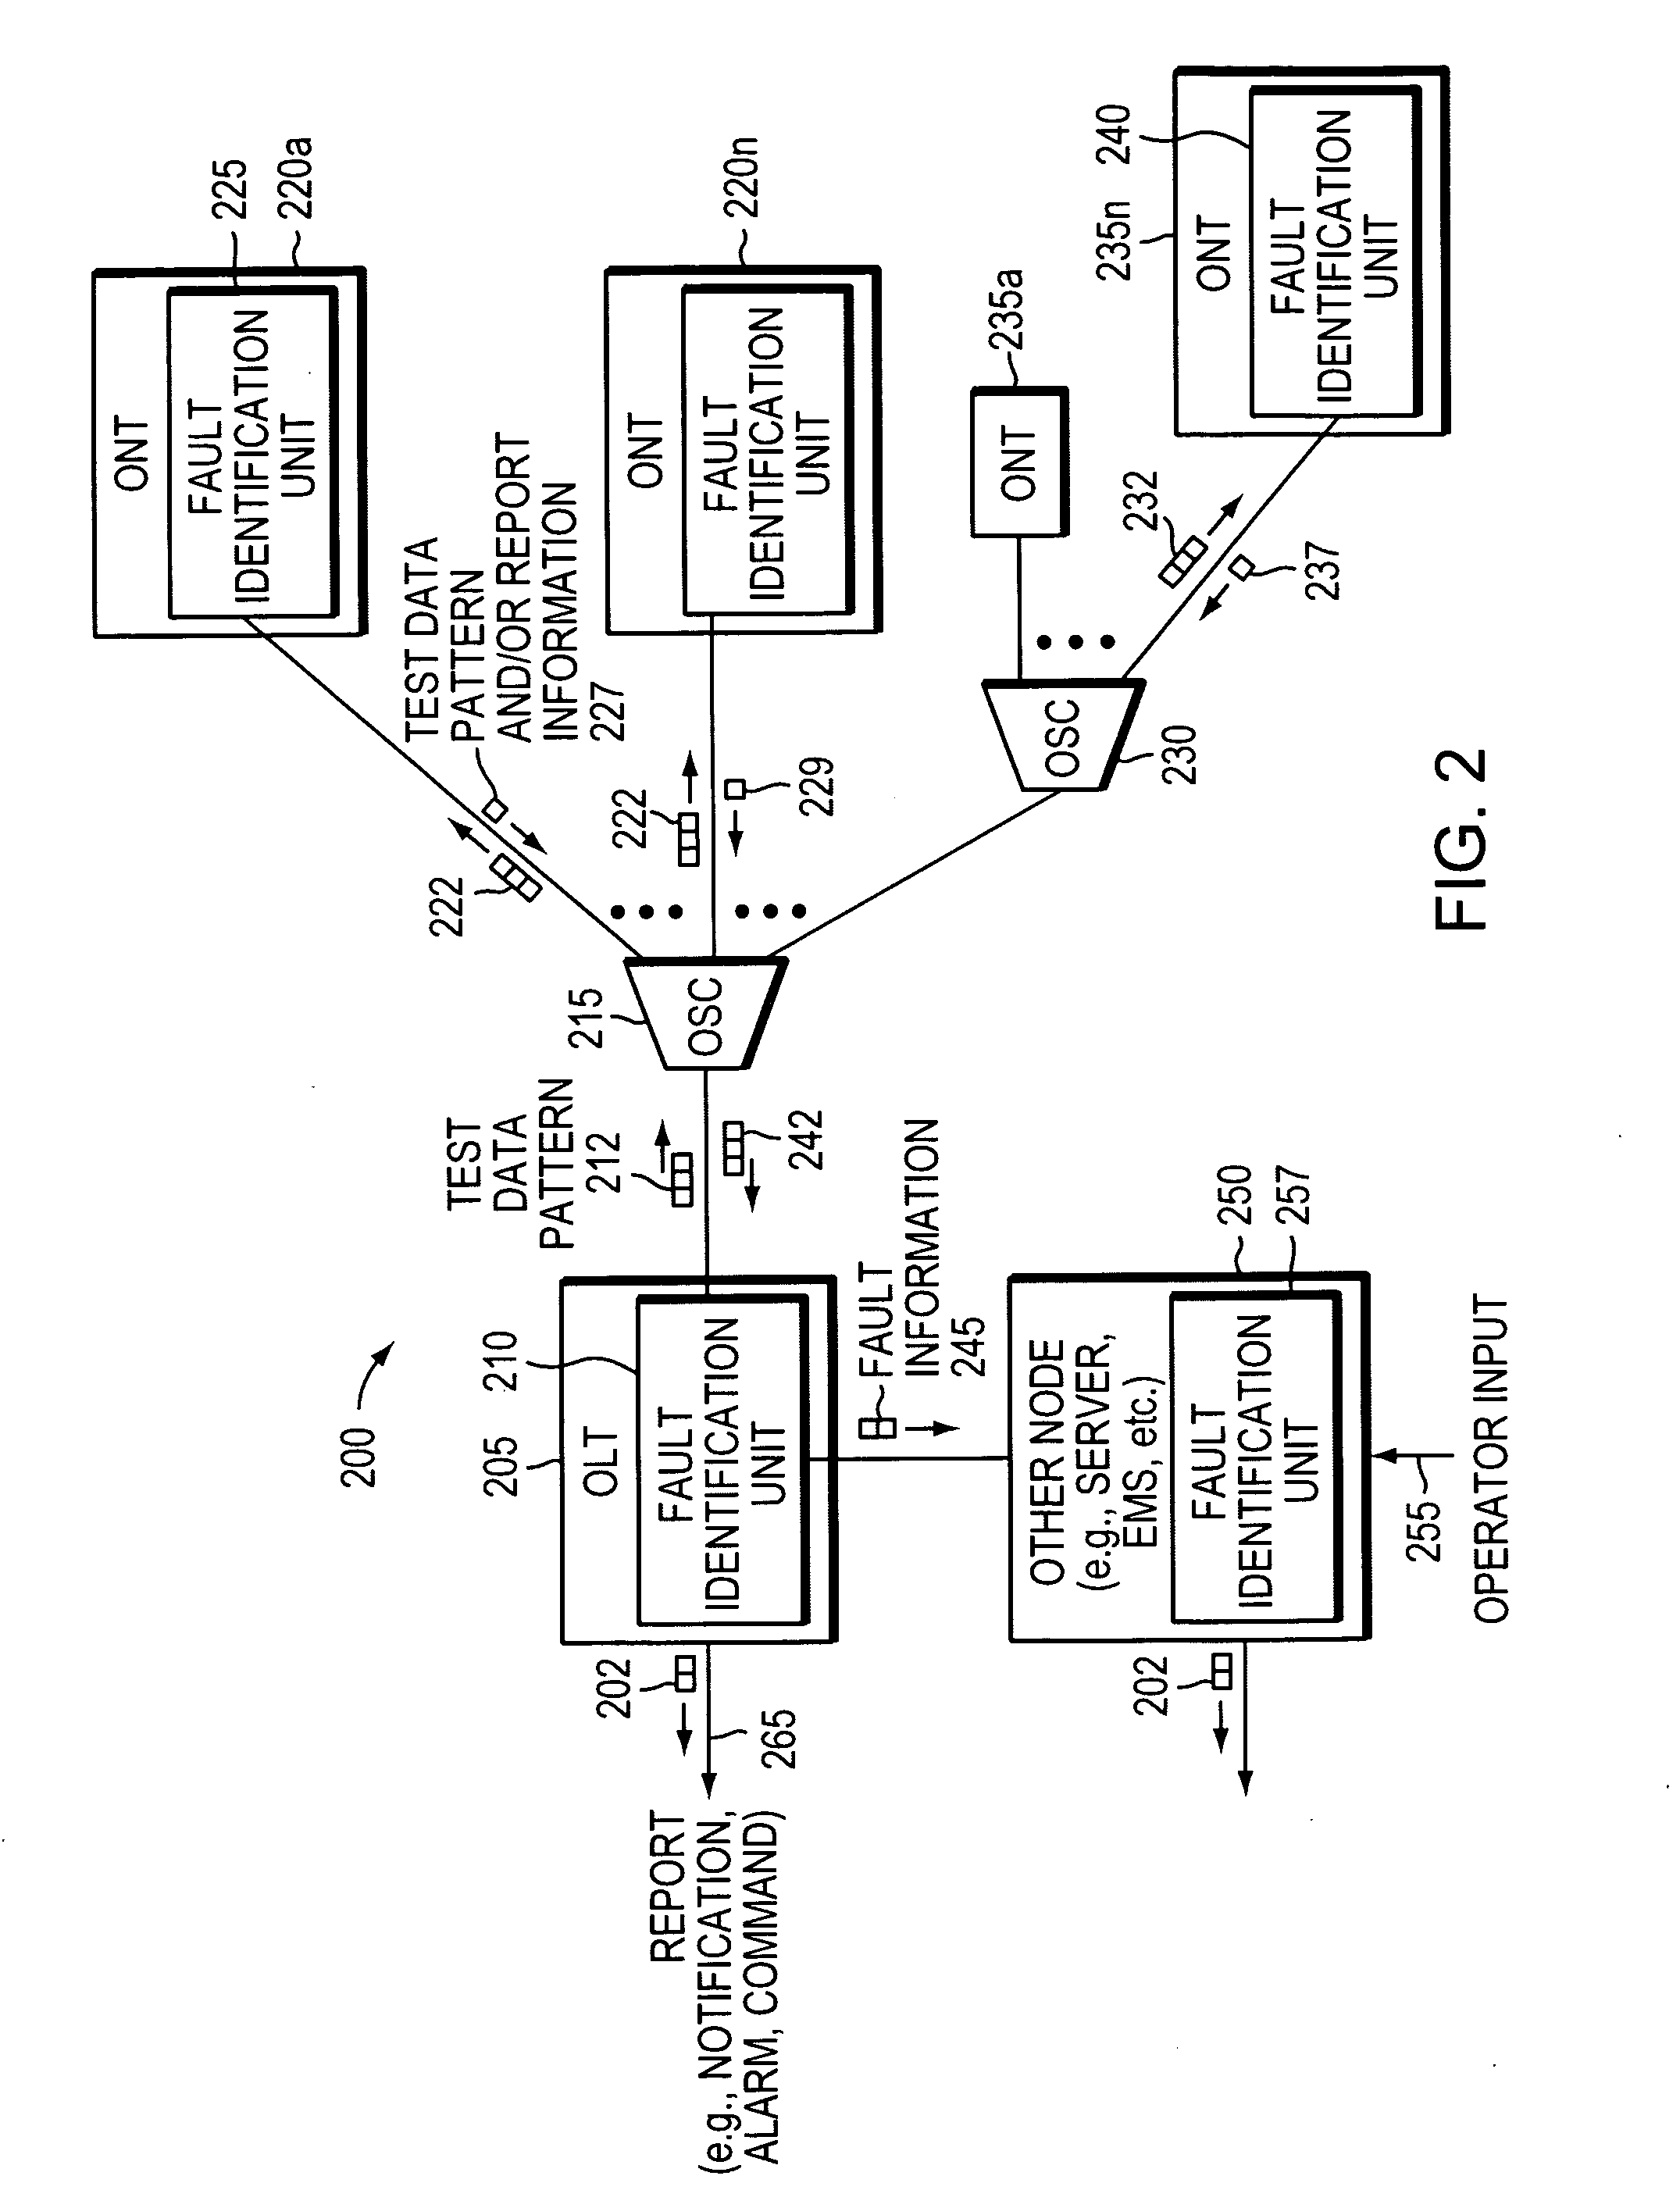 Method and apparatus for identifying faults in a passive optical network